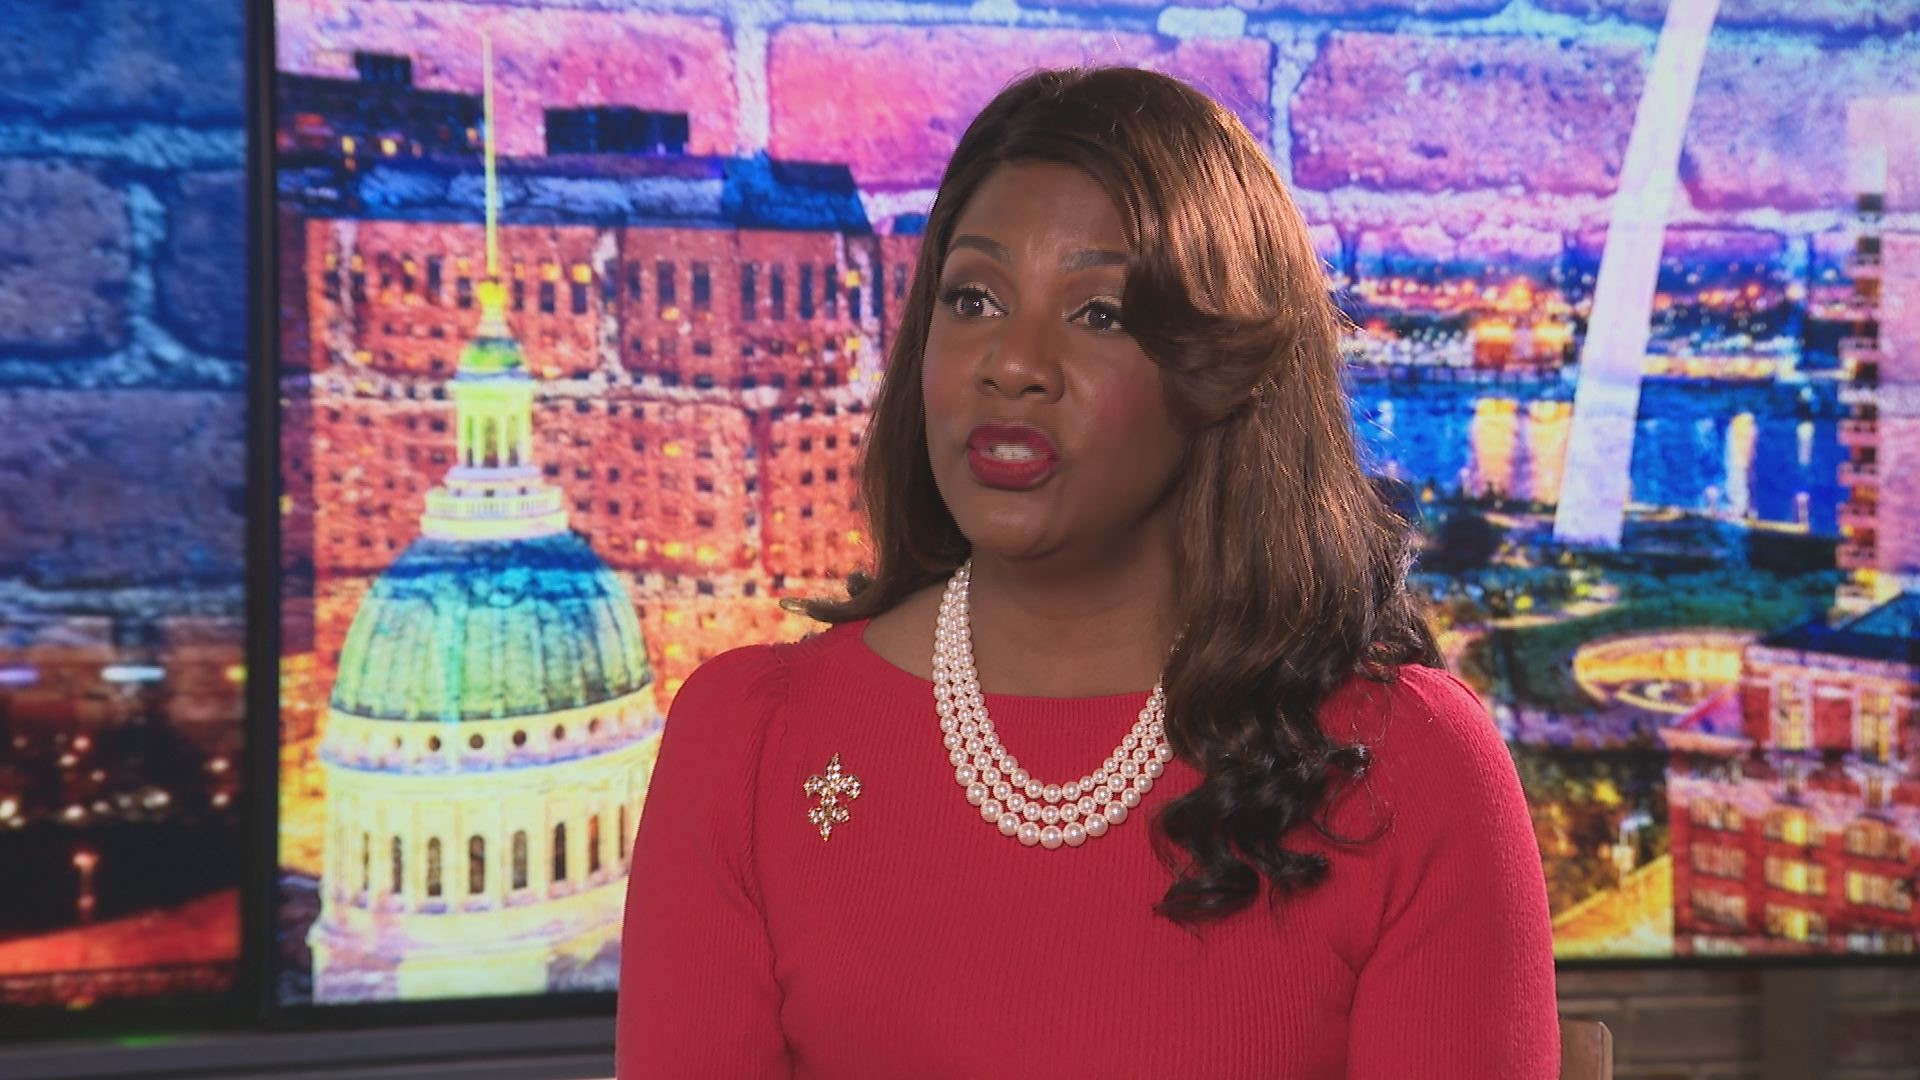 The first Black woman elected to lead the City of St. Louis announced her intention to run for re-election during an exclusive interview on 5 On Your Side.